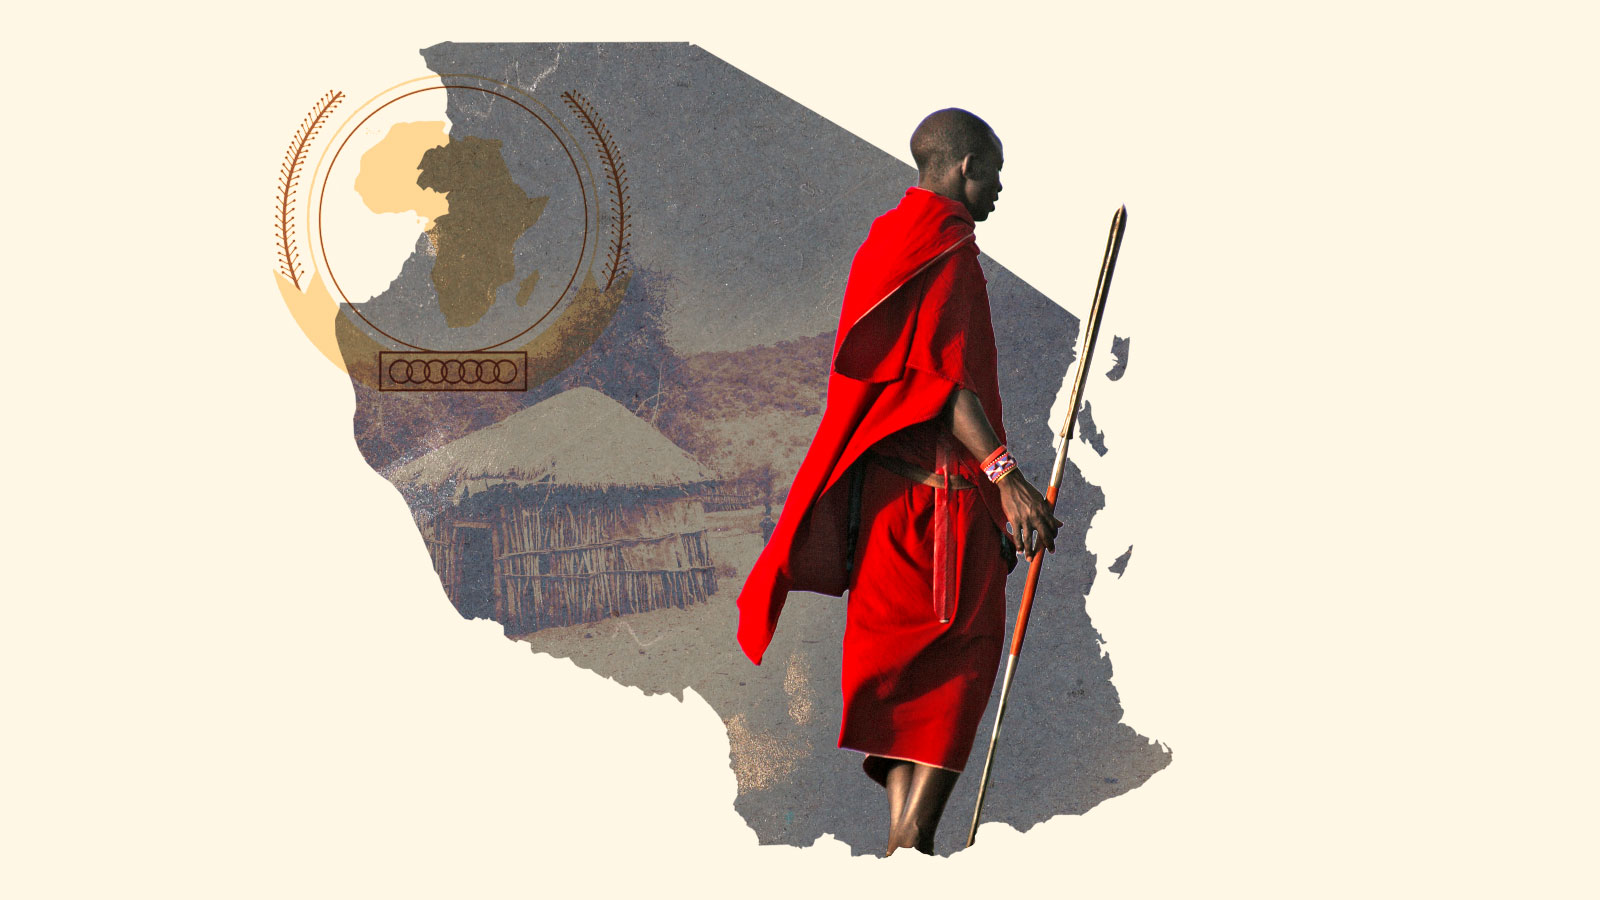 collage: silhouette of Tanzania with Maasai warrior and logo of the African Commission on Human Rights